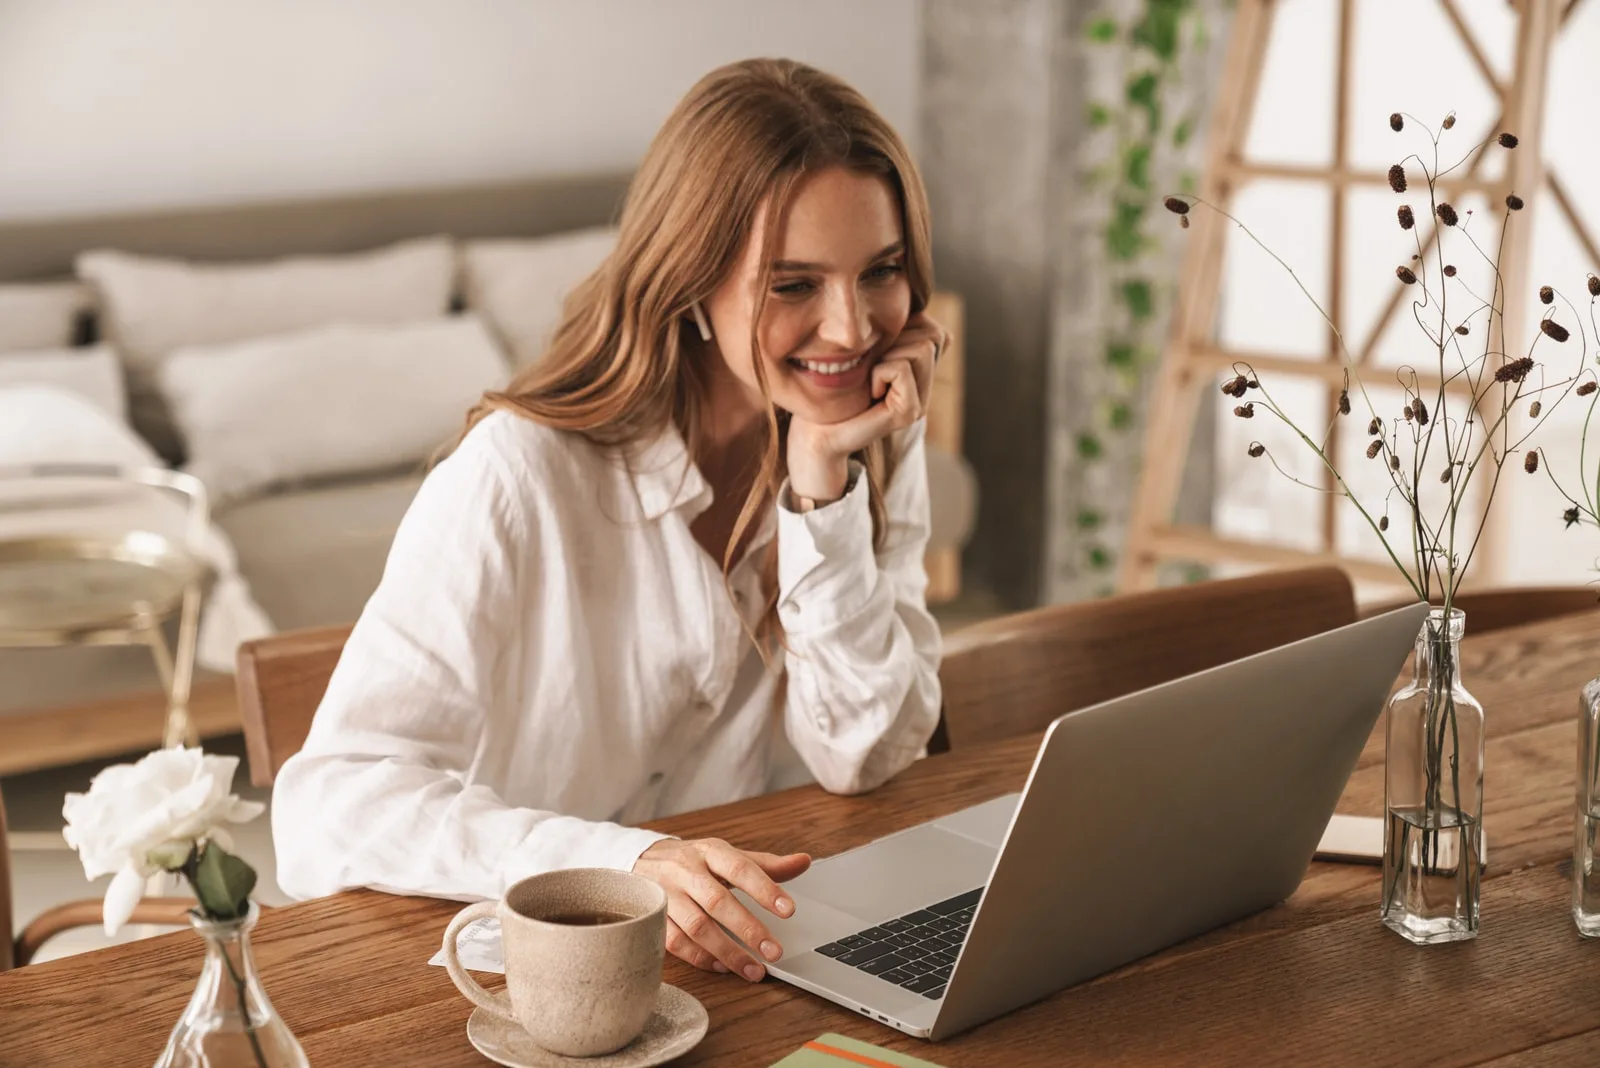 smiling cheerful woman looking at her laptop